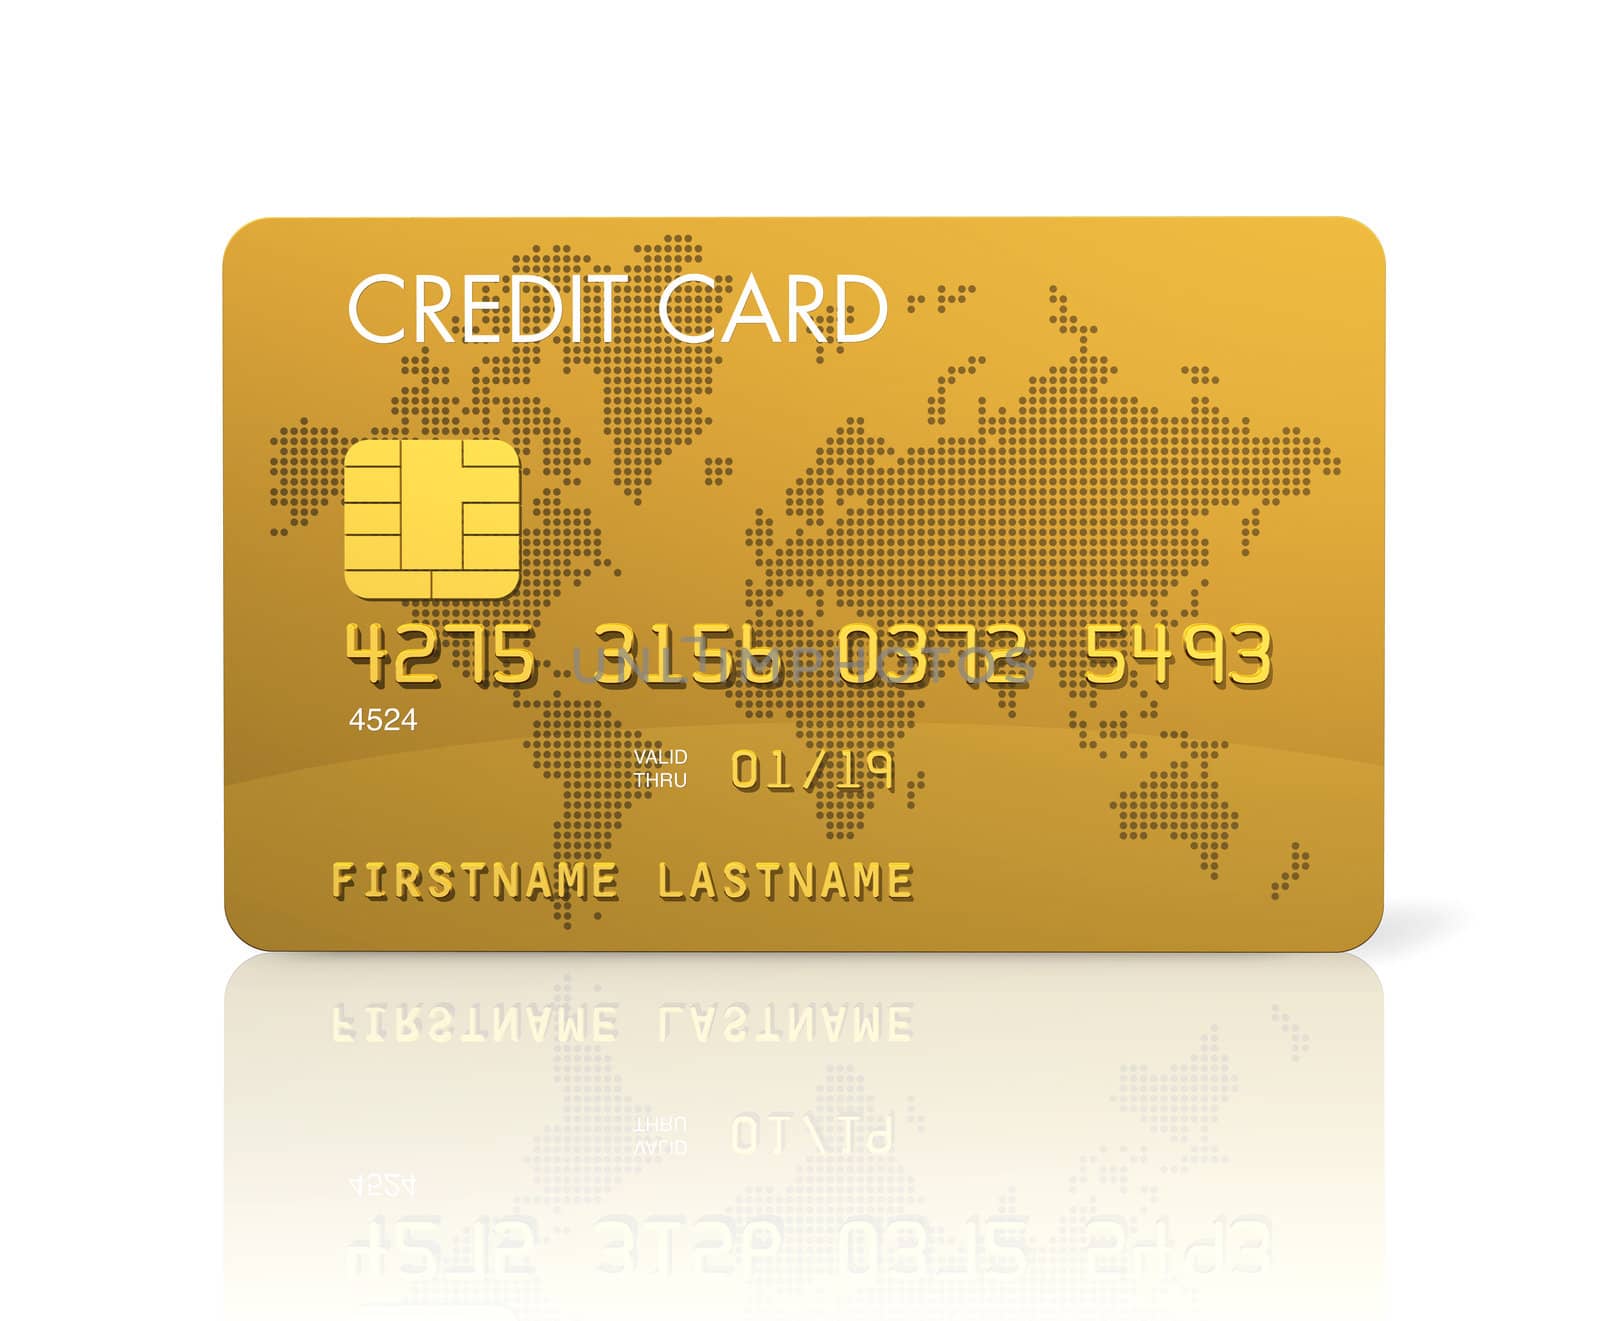 Gold credit card by daboost